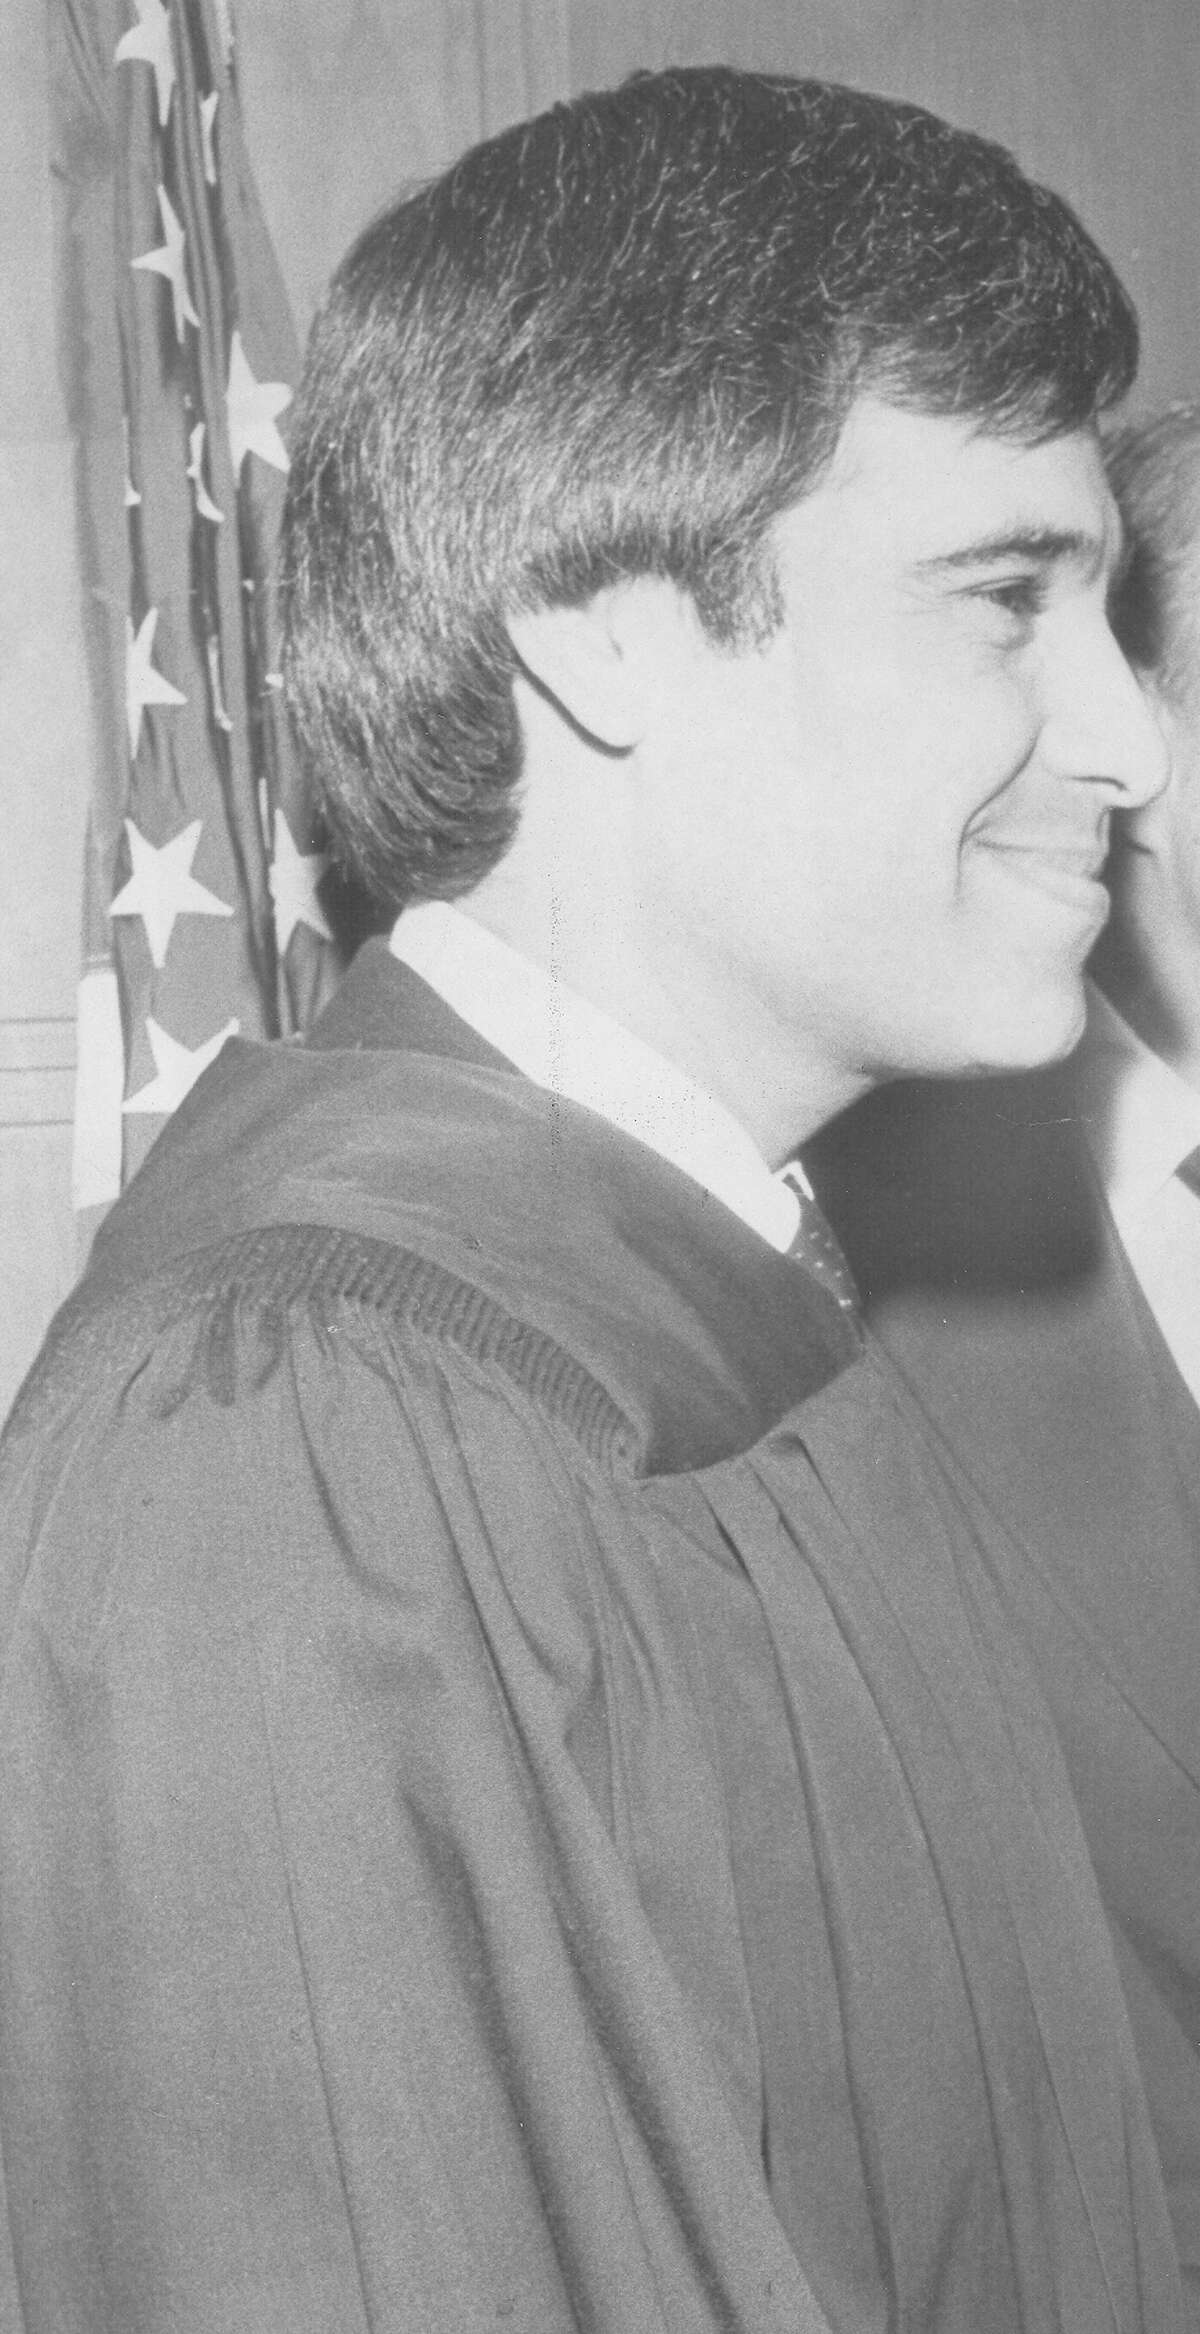 Attorney Charlie Gonzalez is sworn in as the new judge of Bexar County Court-of-Law No. 2 on Jan. 2, 1983. U.S. Rep. Henry B. Gonzalez made a few remarks to the crowd at St. Mary's University Law School before his son took the oath of office from Texas Supreme Court Justice Franklin Spears.